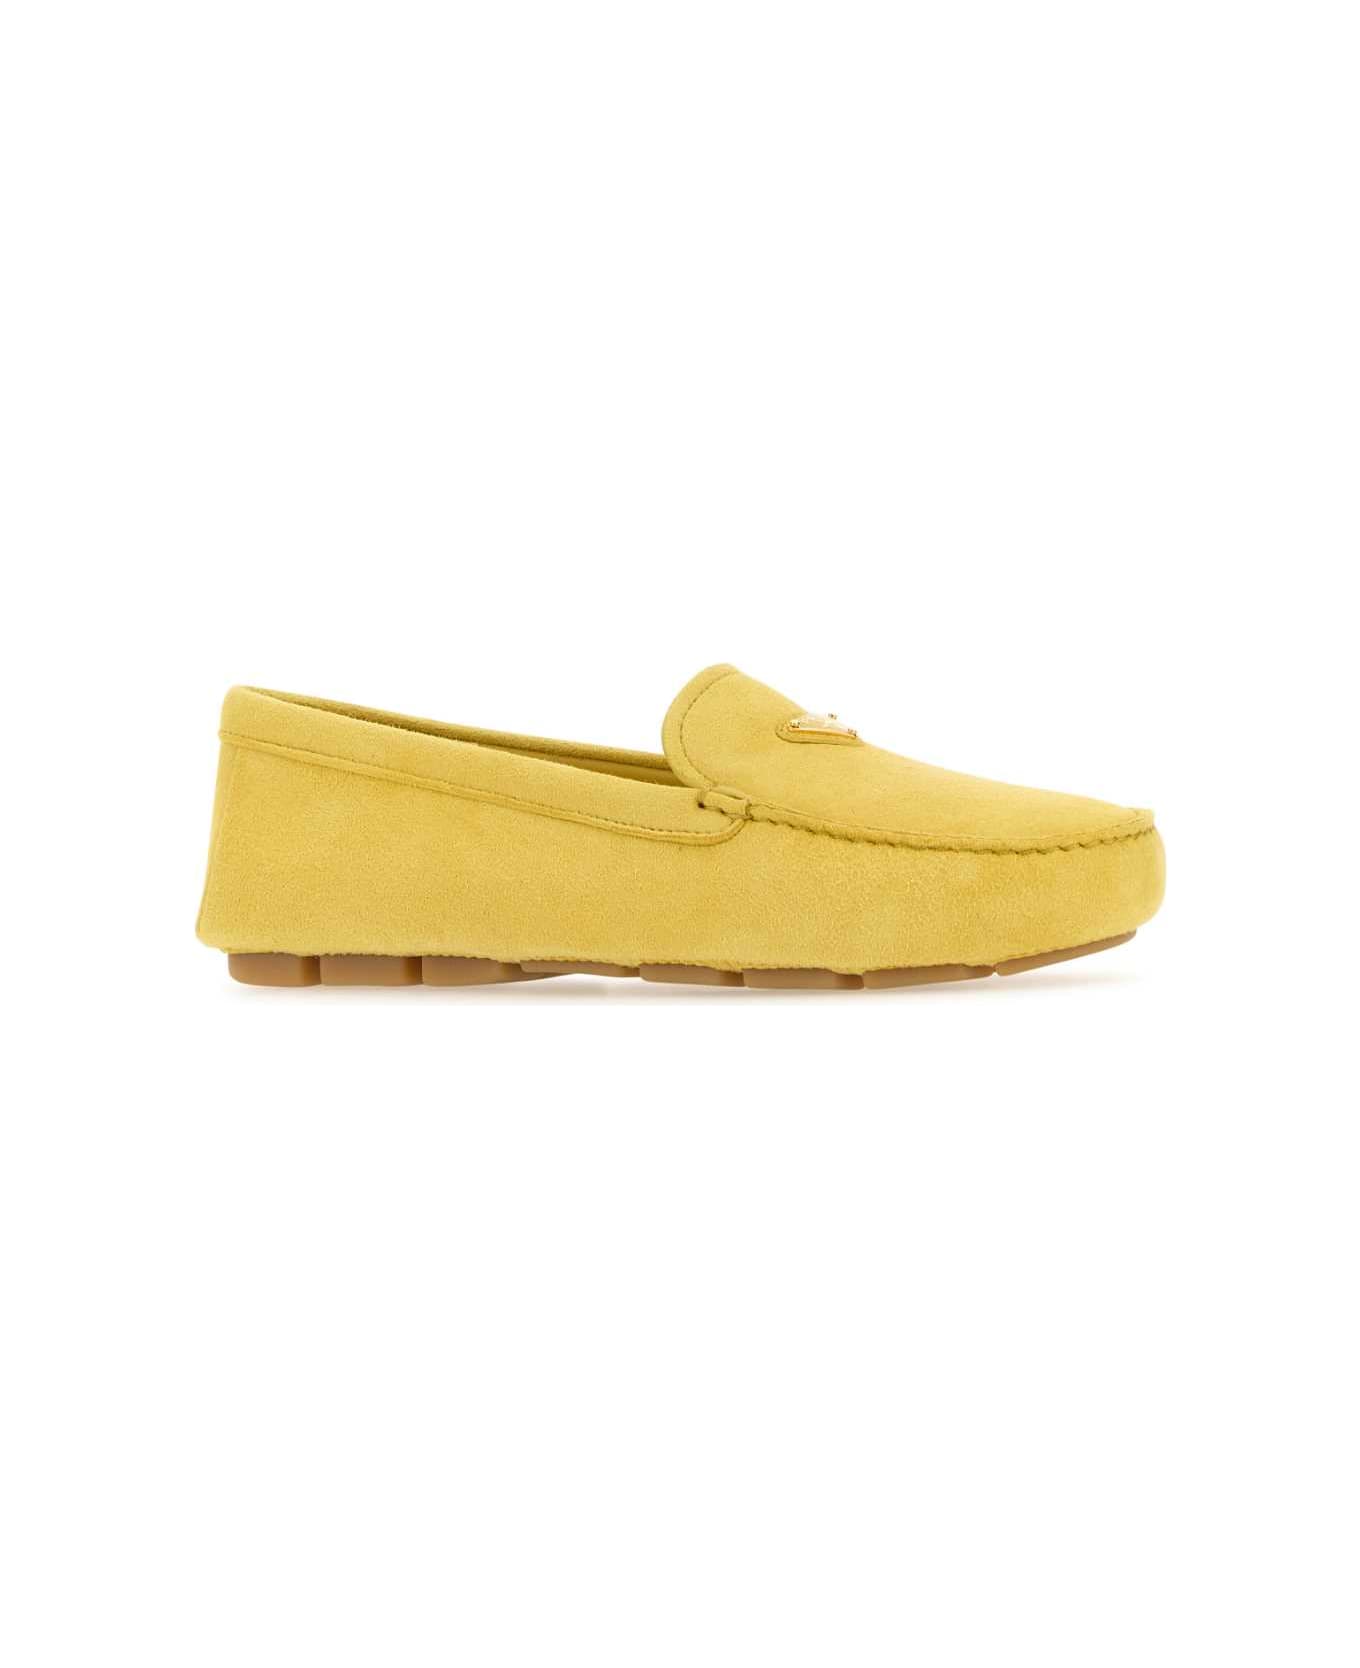 Prada Yellow Suede Loafers - SOLE フラットシューズ